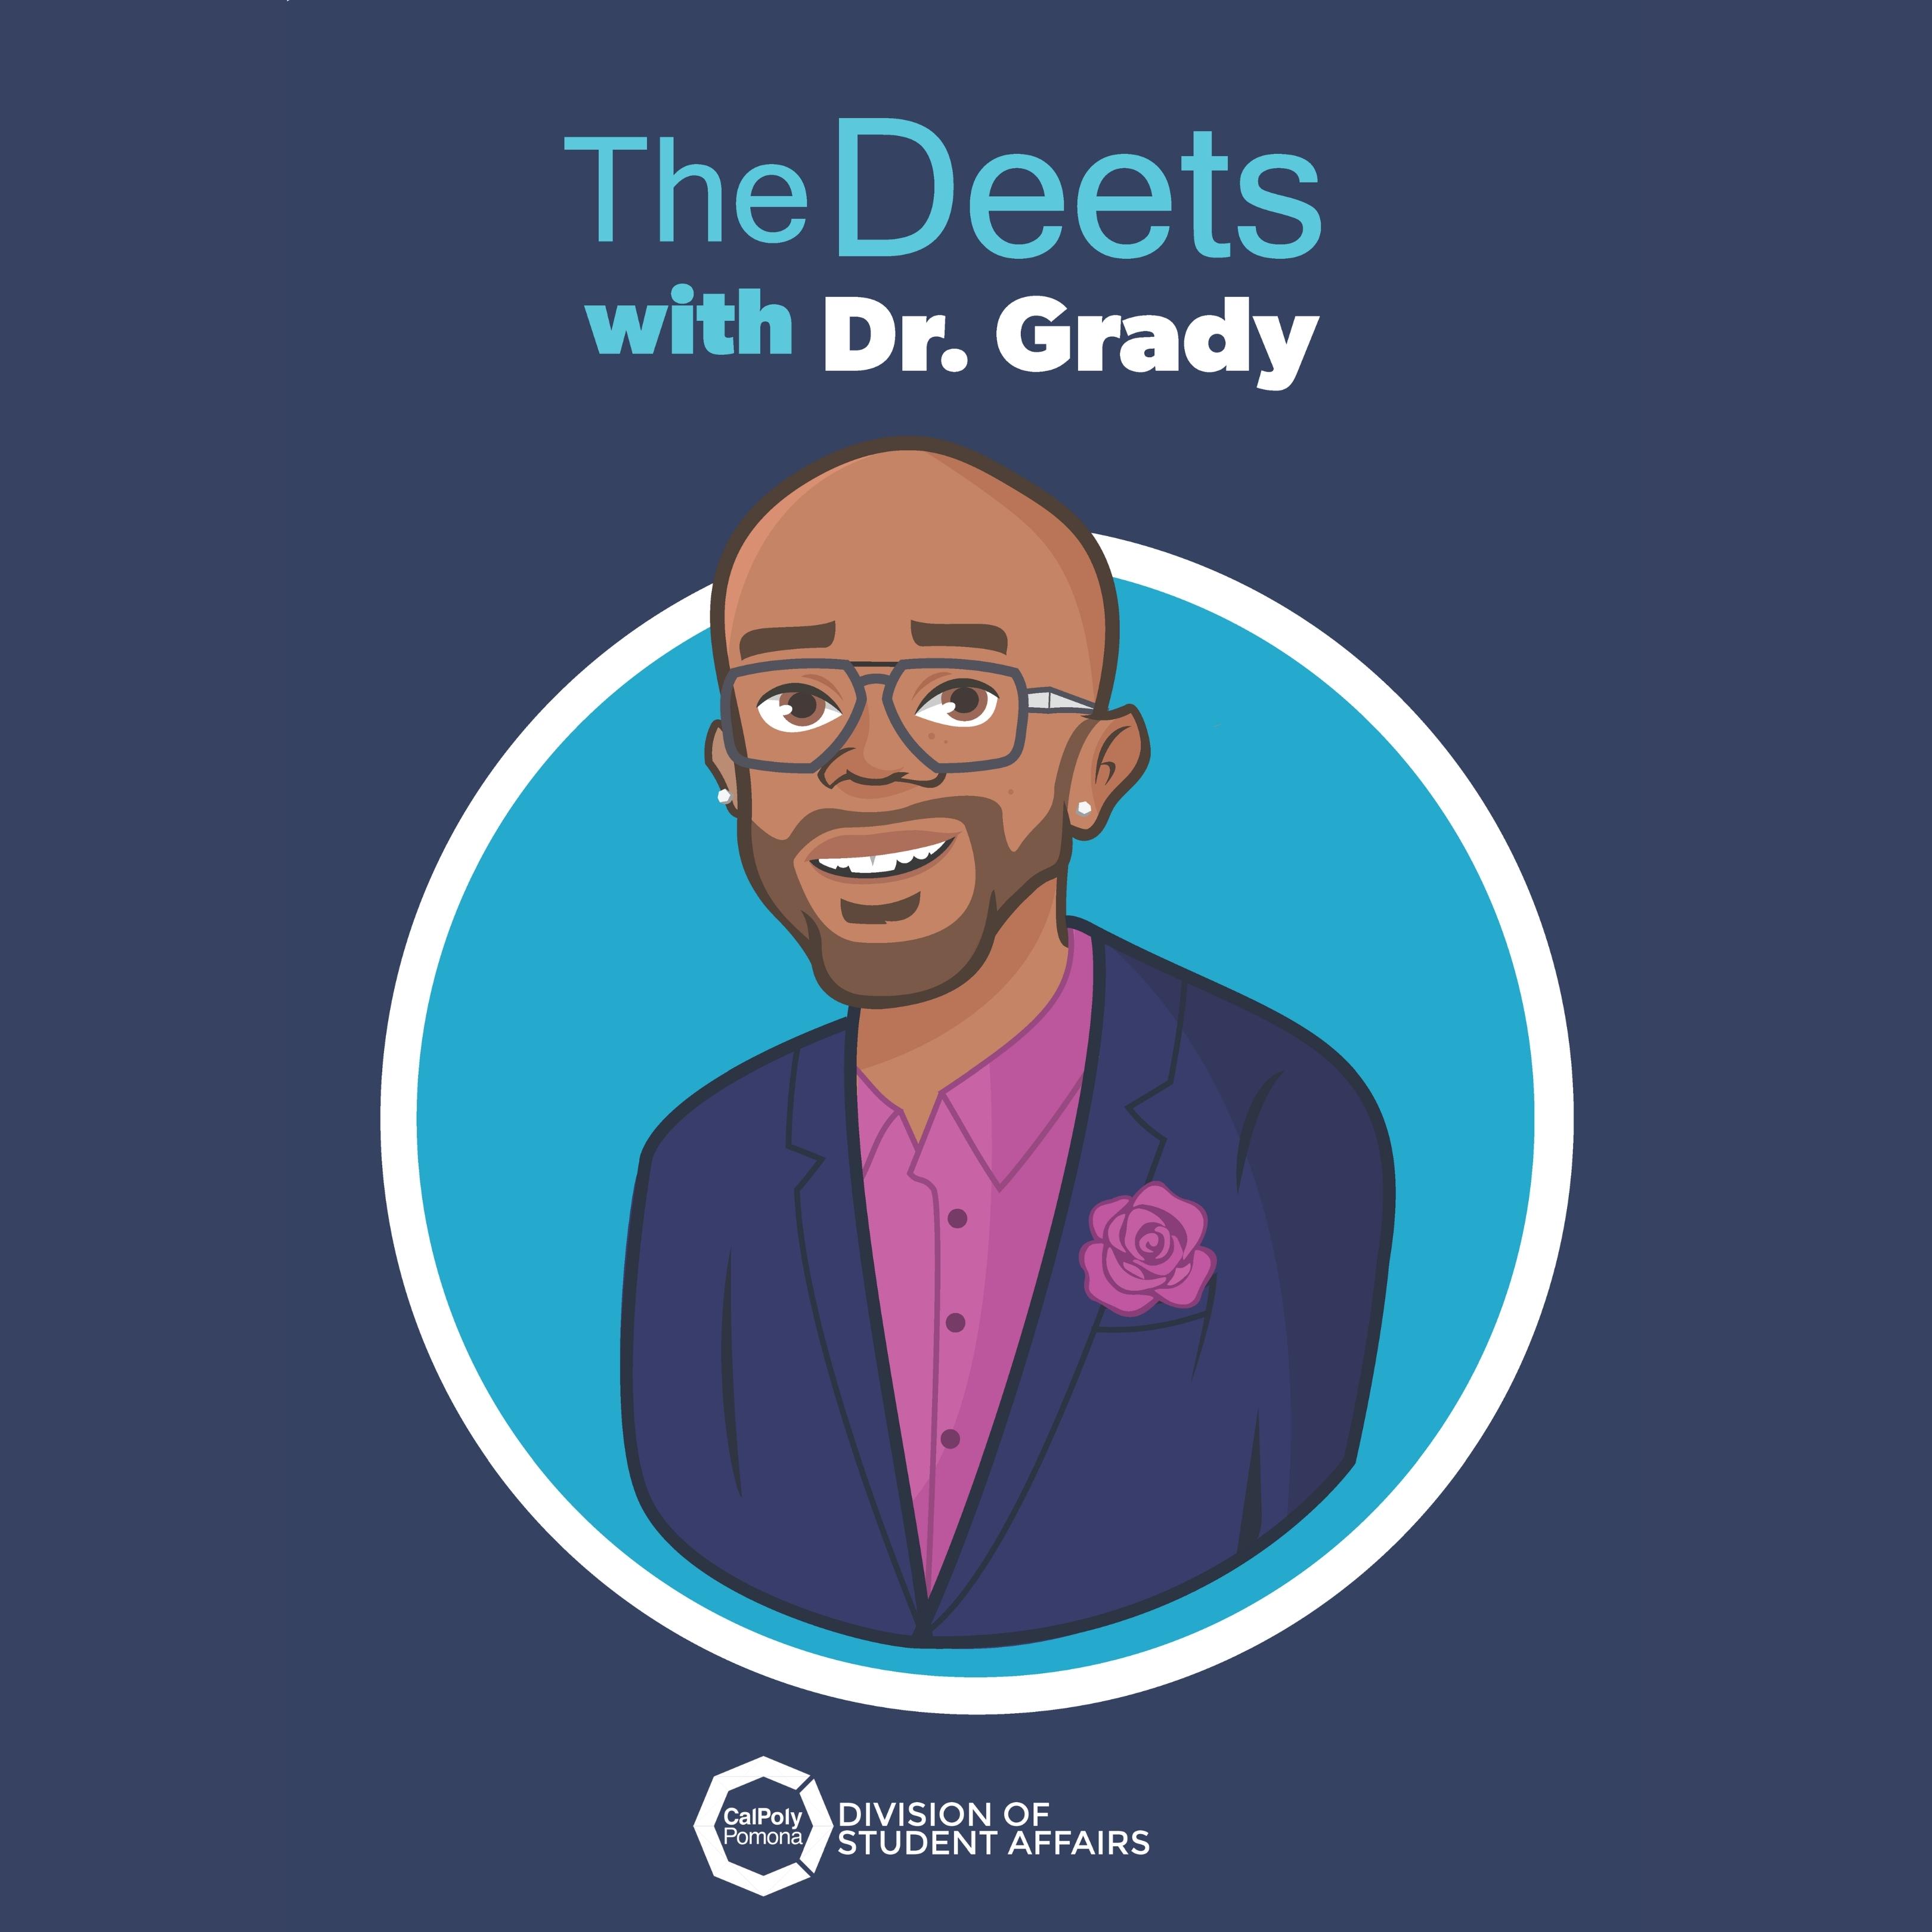 The Deets with Dr. Grady